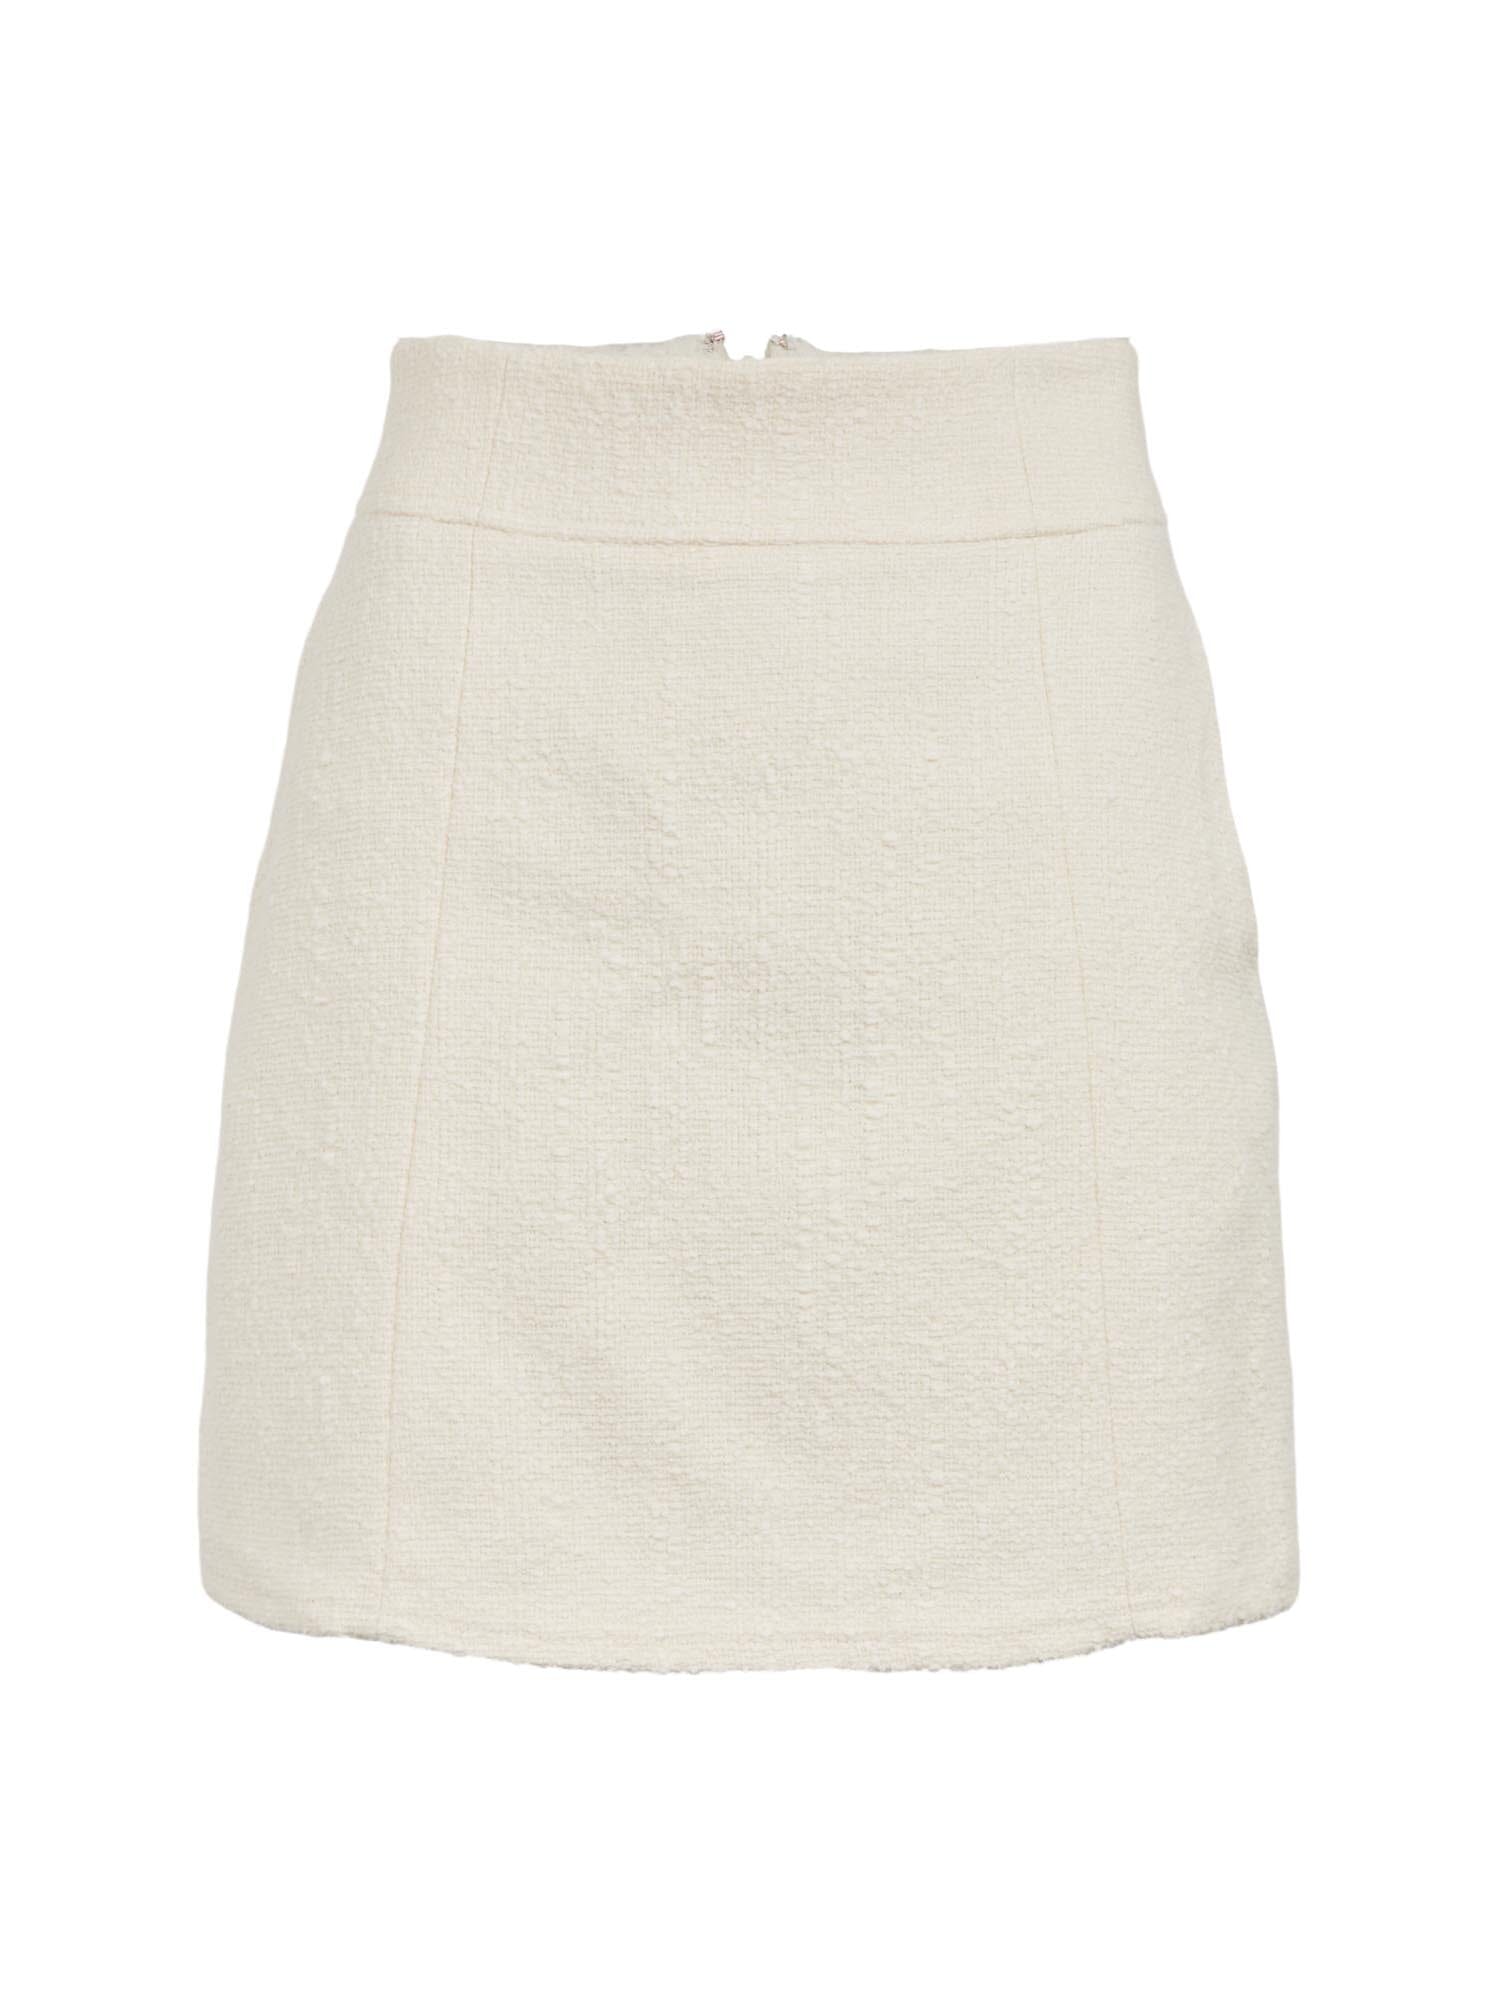 AVALON - Cut-Out Mini Skirt in Tweed Cotton and Textured Wool Ecru Skirt Fête Impériale